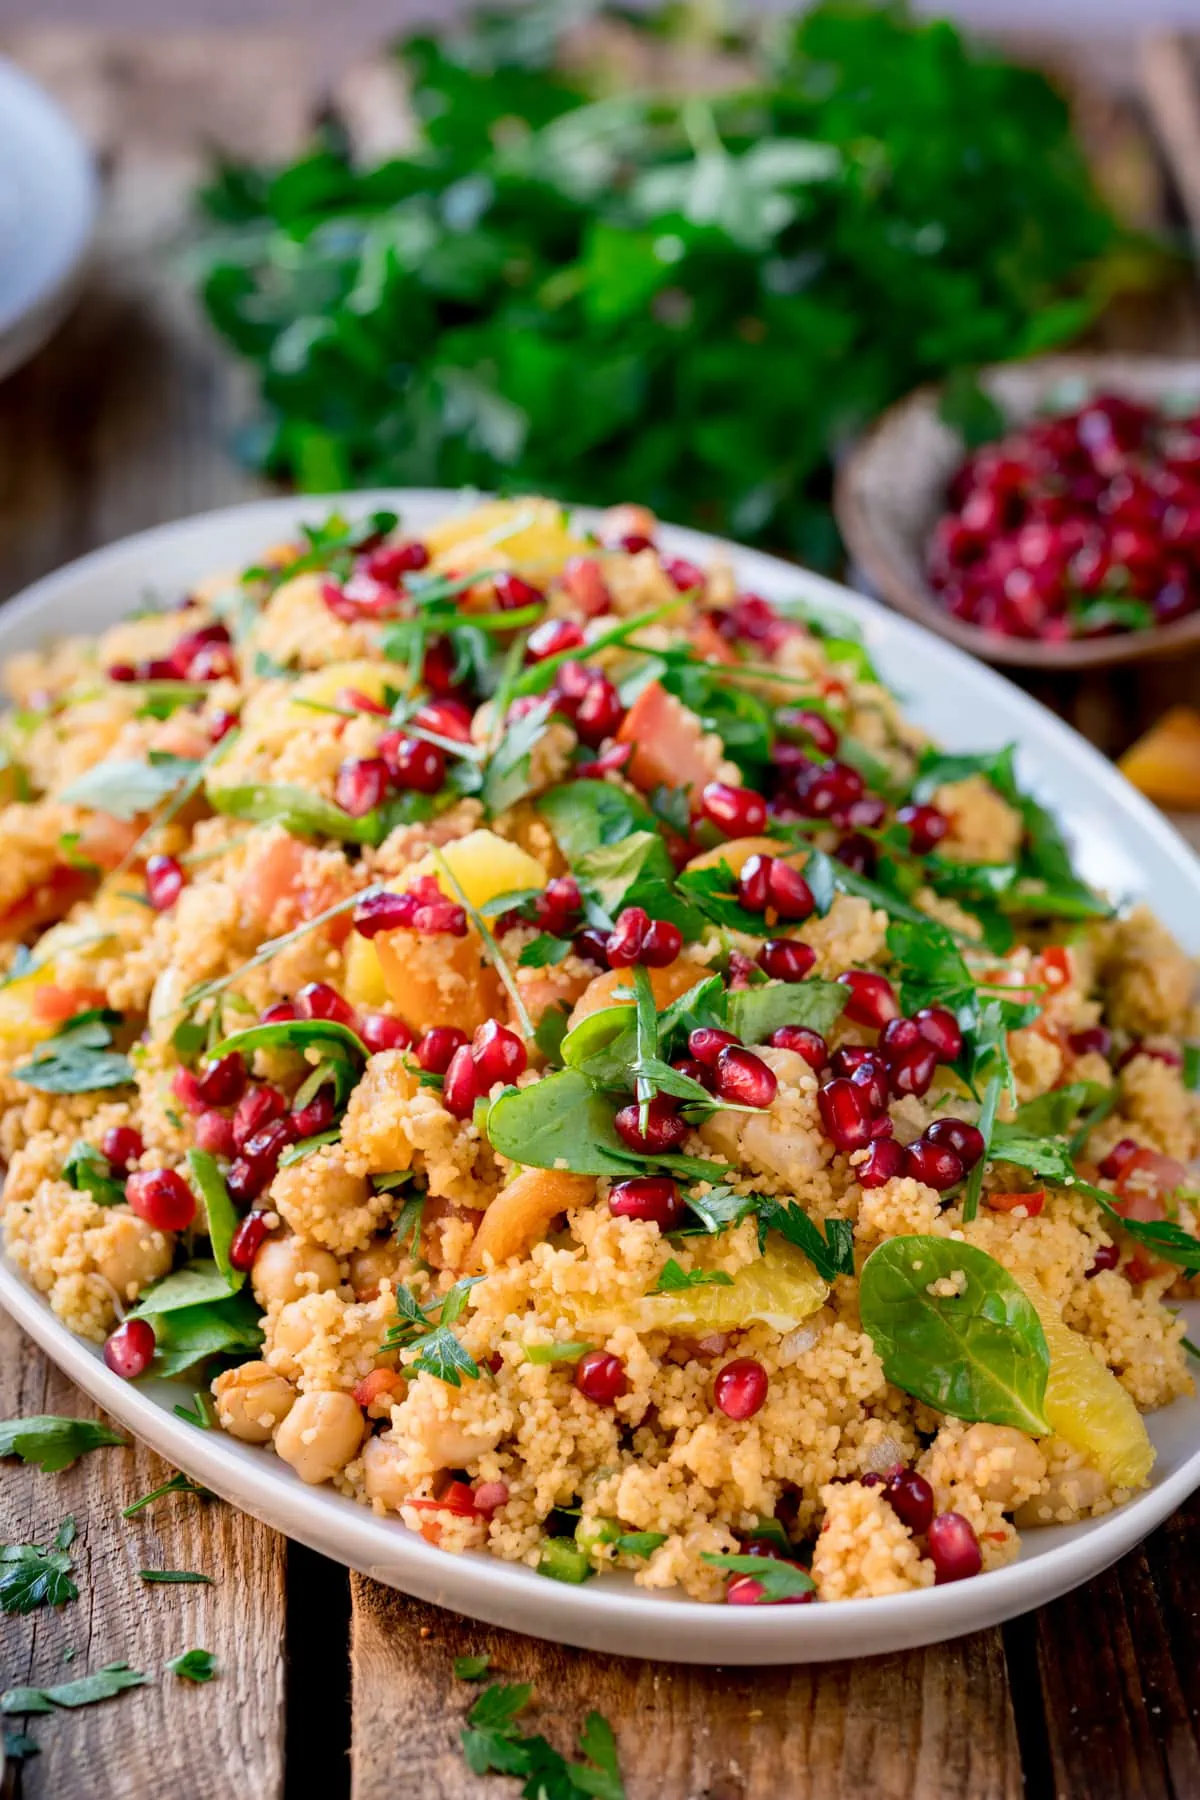 Side-on image of a large oval serving plate filled with Moroccan style couscous, topped with herbs and pomegranate. The plate is on a wooden table and there are fresh herbs and a little bowl of pomegranate in the background.